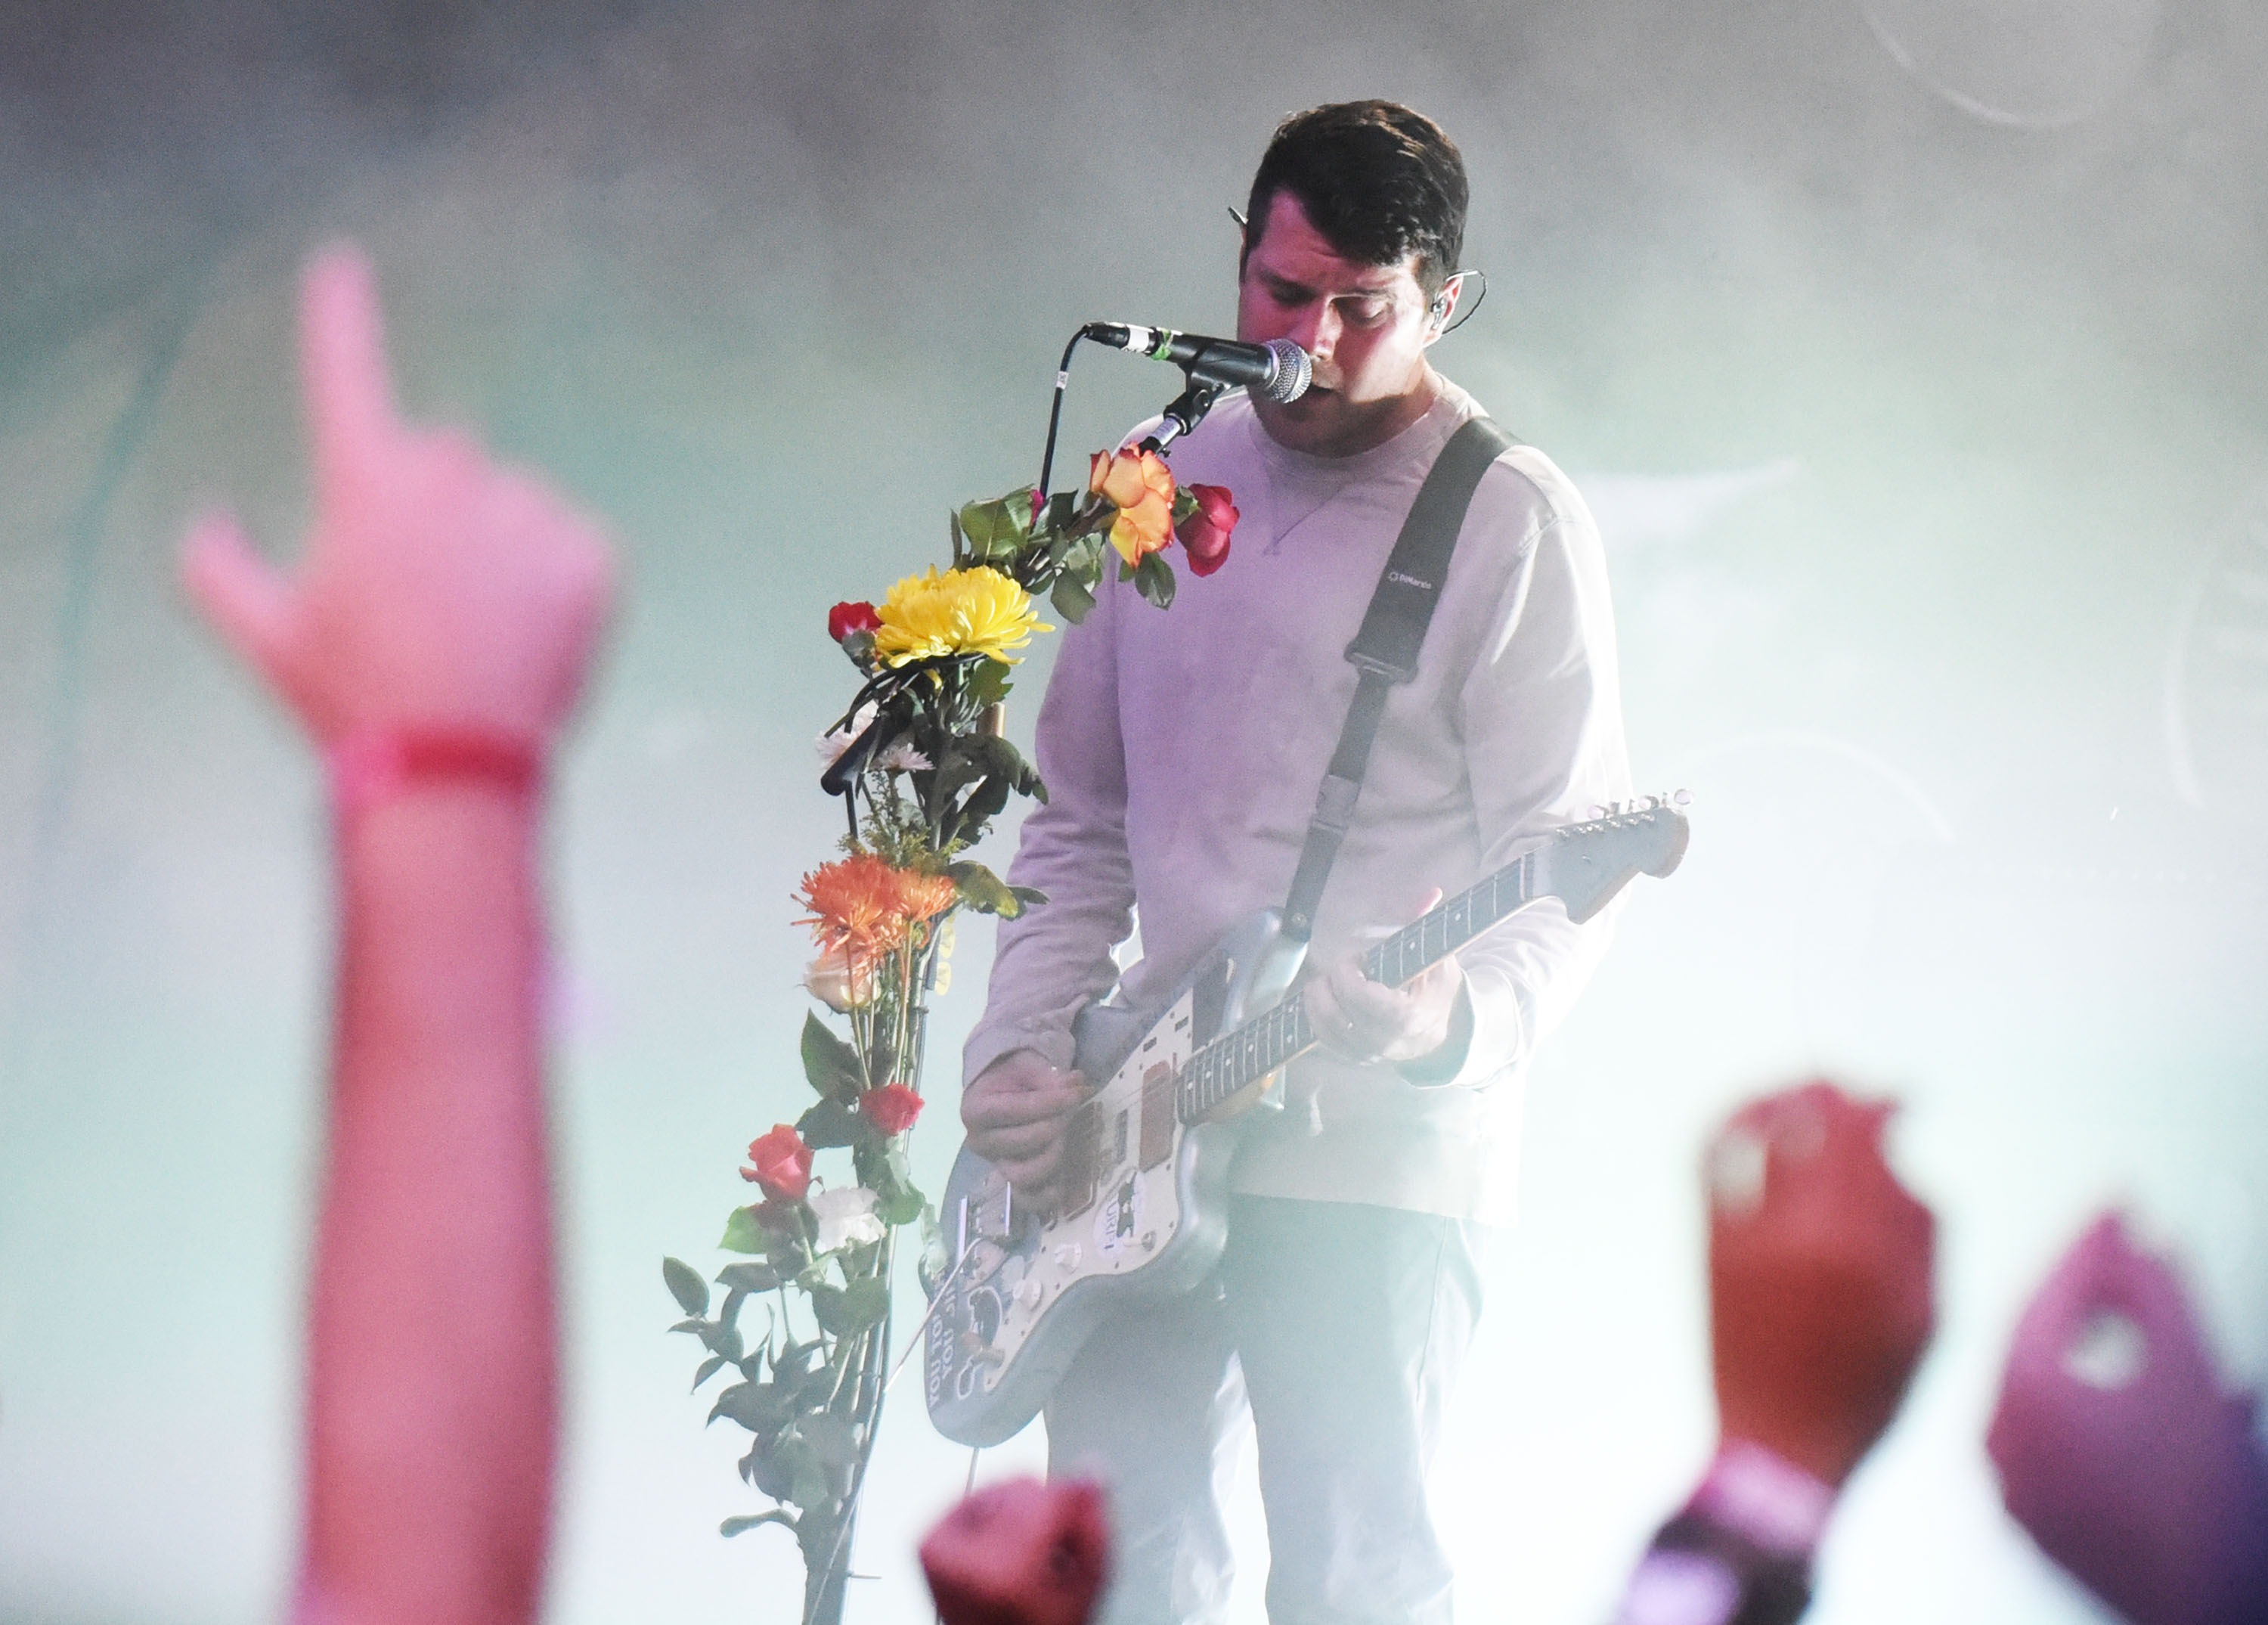 Vocalist Guitarist Jesse Lacey of Brand New performs during the 2008, FilmMagic